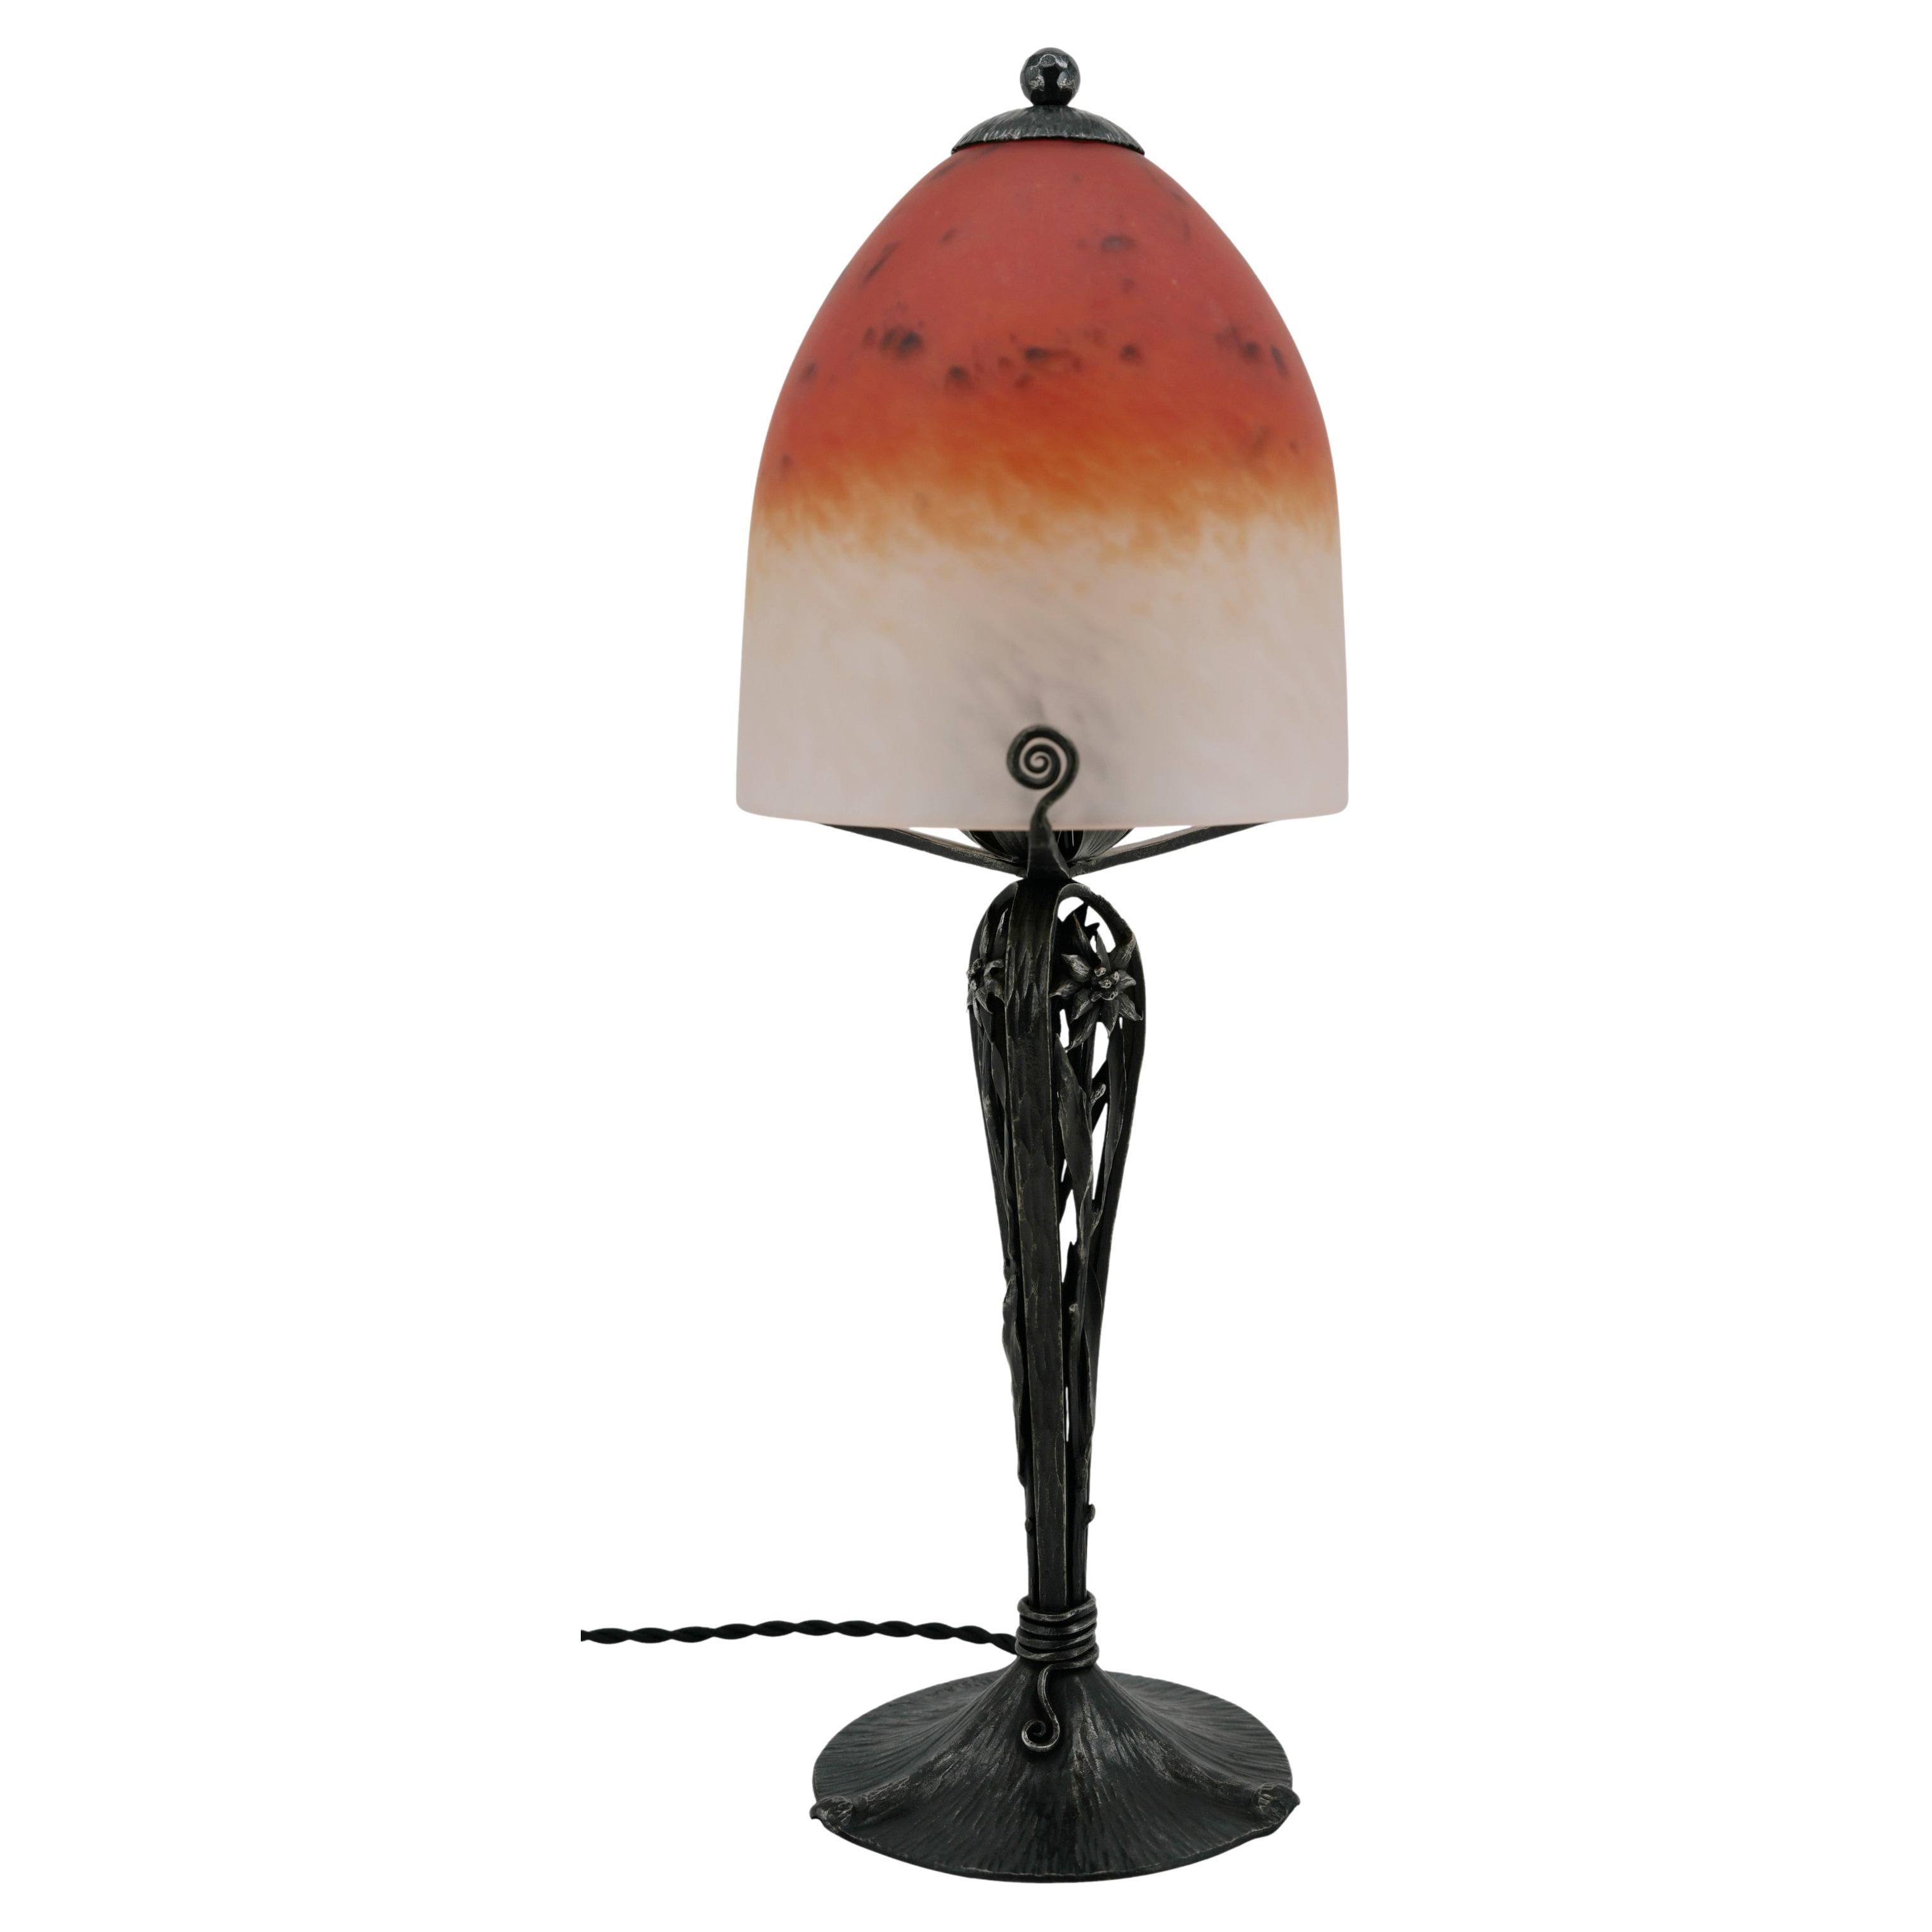 SCHNEIDER & VOUTIER French Art Deco Table Lamp, 1924-1928 For Sale